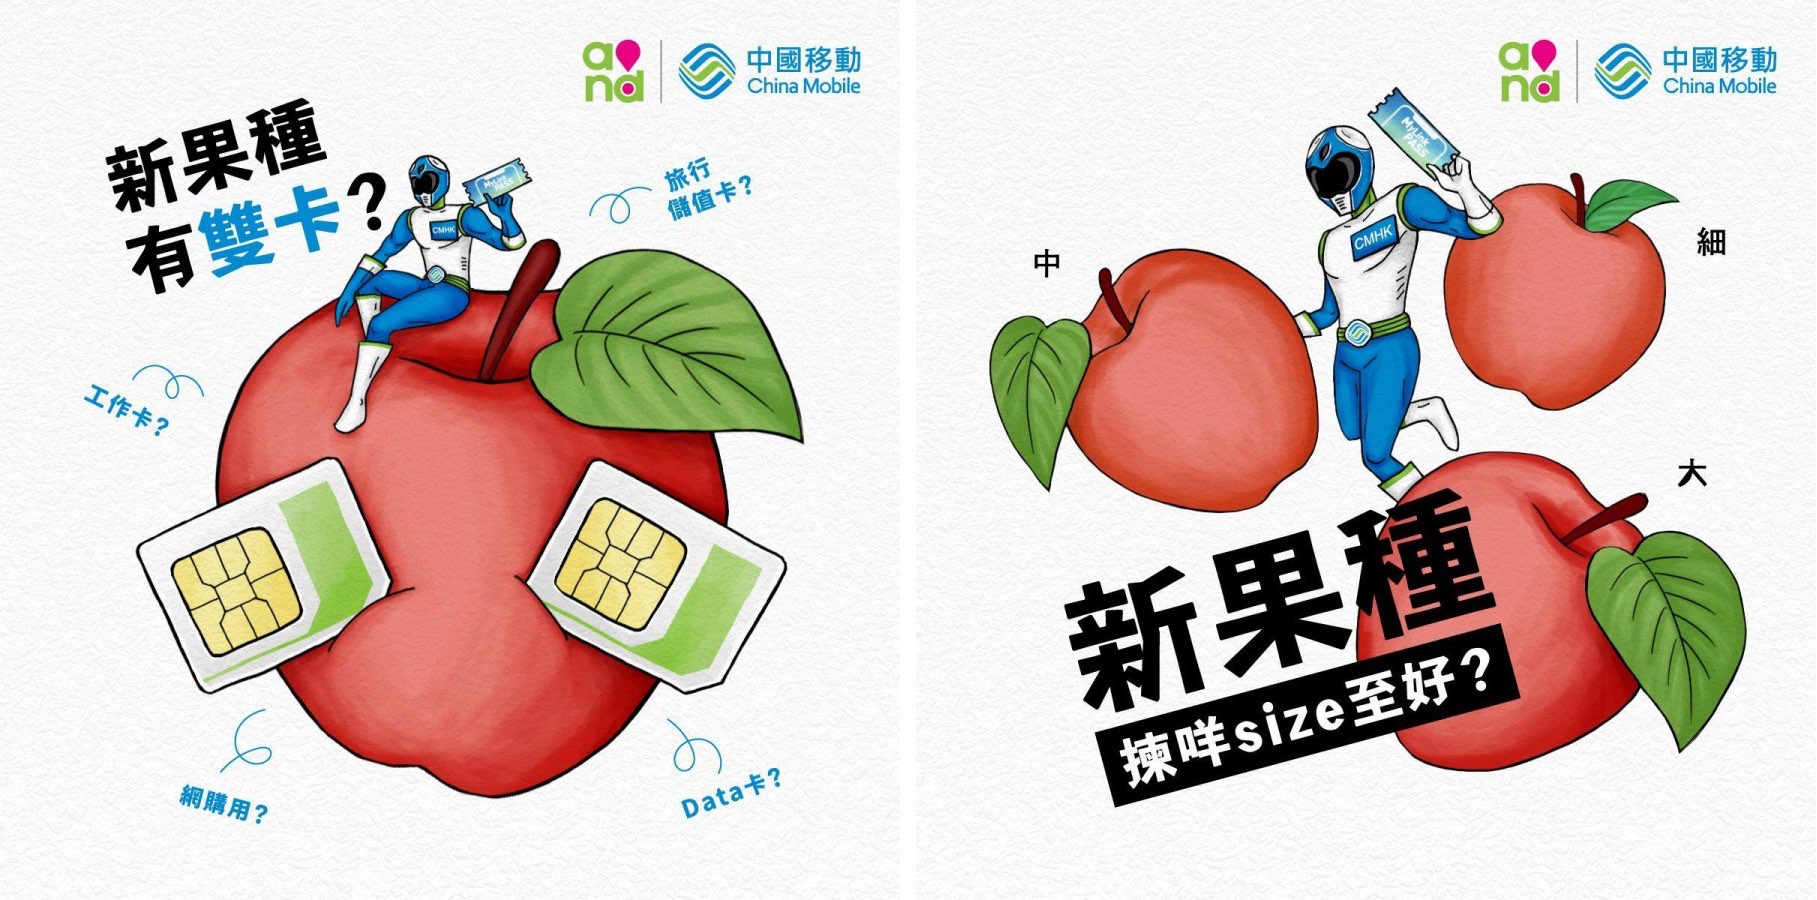 China Mobile's social media posts hyping dual-SIM support for upcoming iPhones